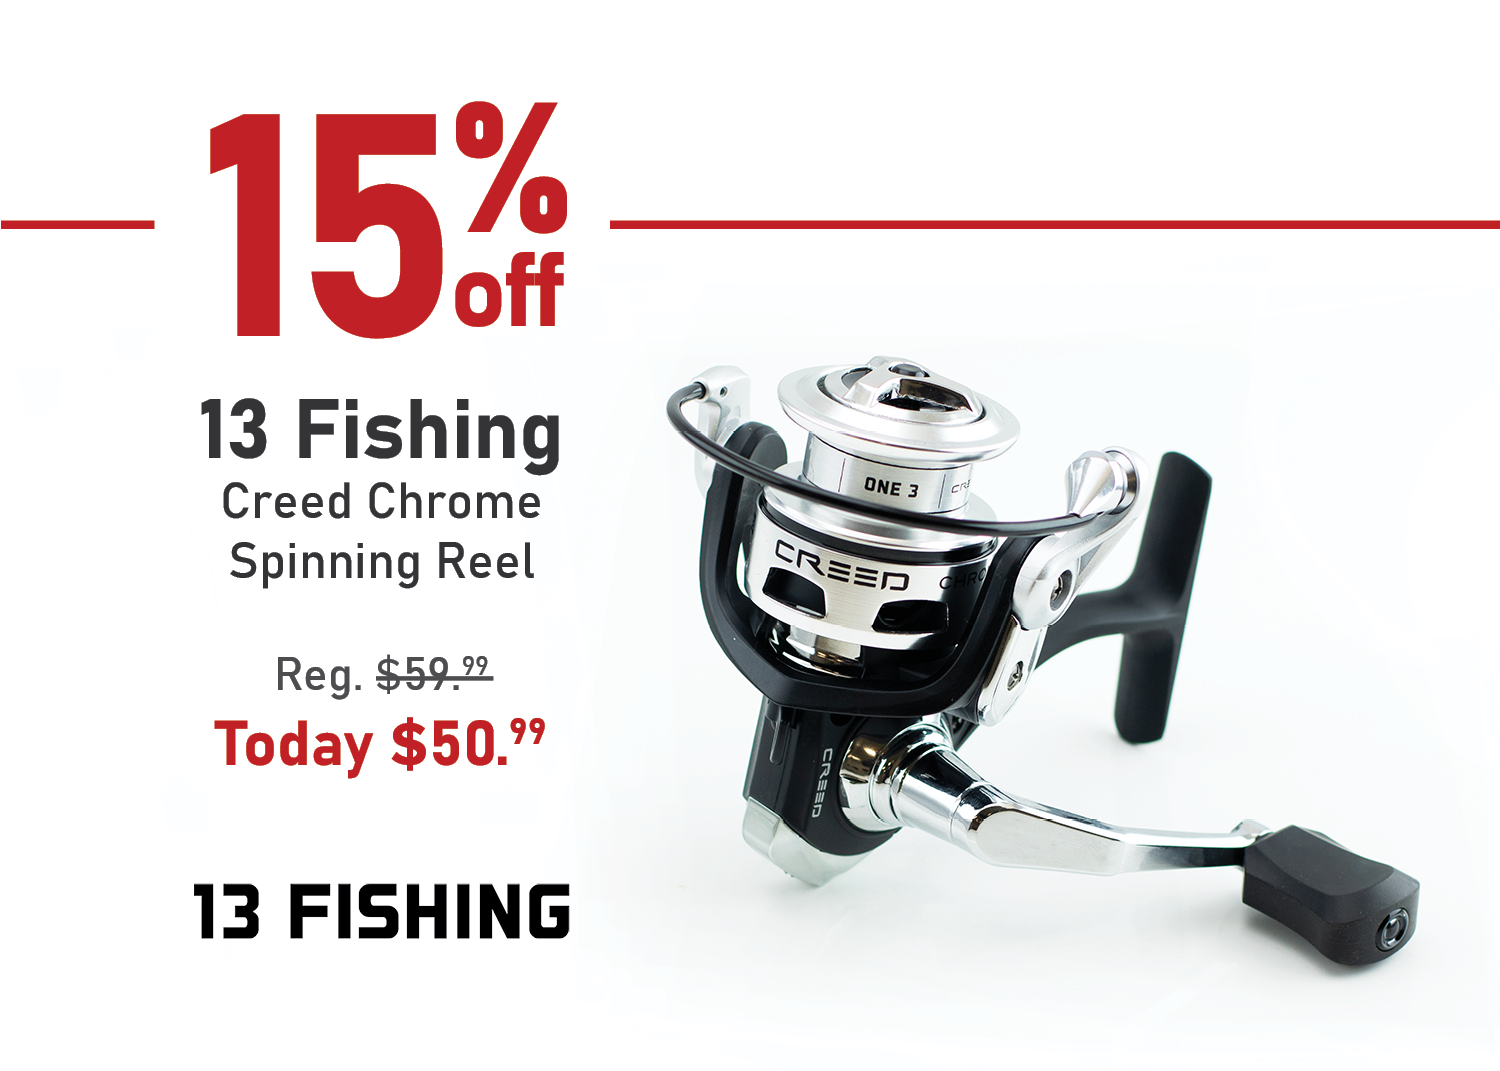 Save 15% on the 13 Fishing Creed Chrome Spinning Reel